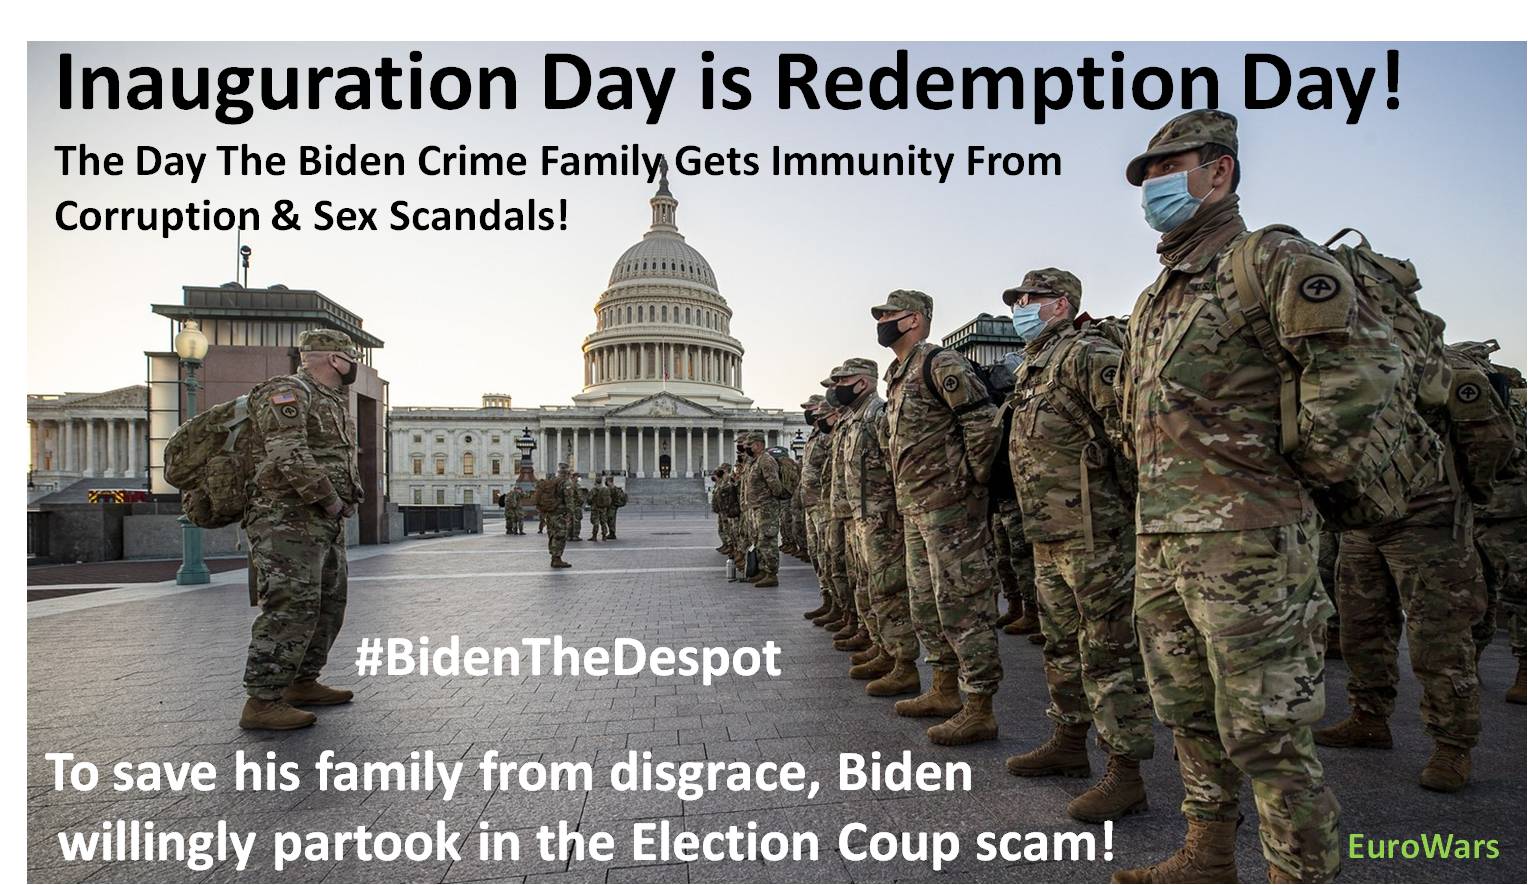 Video: THE JOE BIDEN CRIME FAMILY IS THE DEFINITION OF CORRUPTION & INAUGURATION WILL GIVE THEM IMMUNITY! But Why are Mainstream Media Complicit in the Cover-Up?